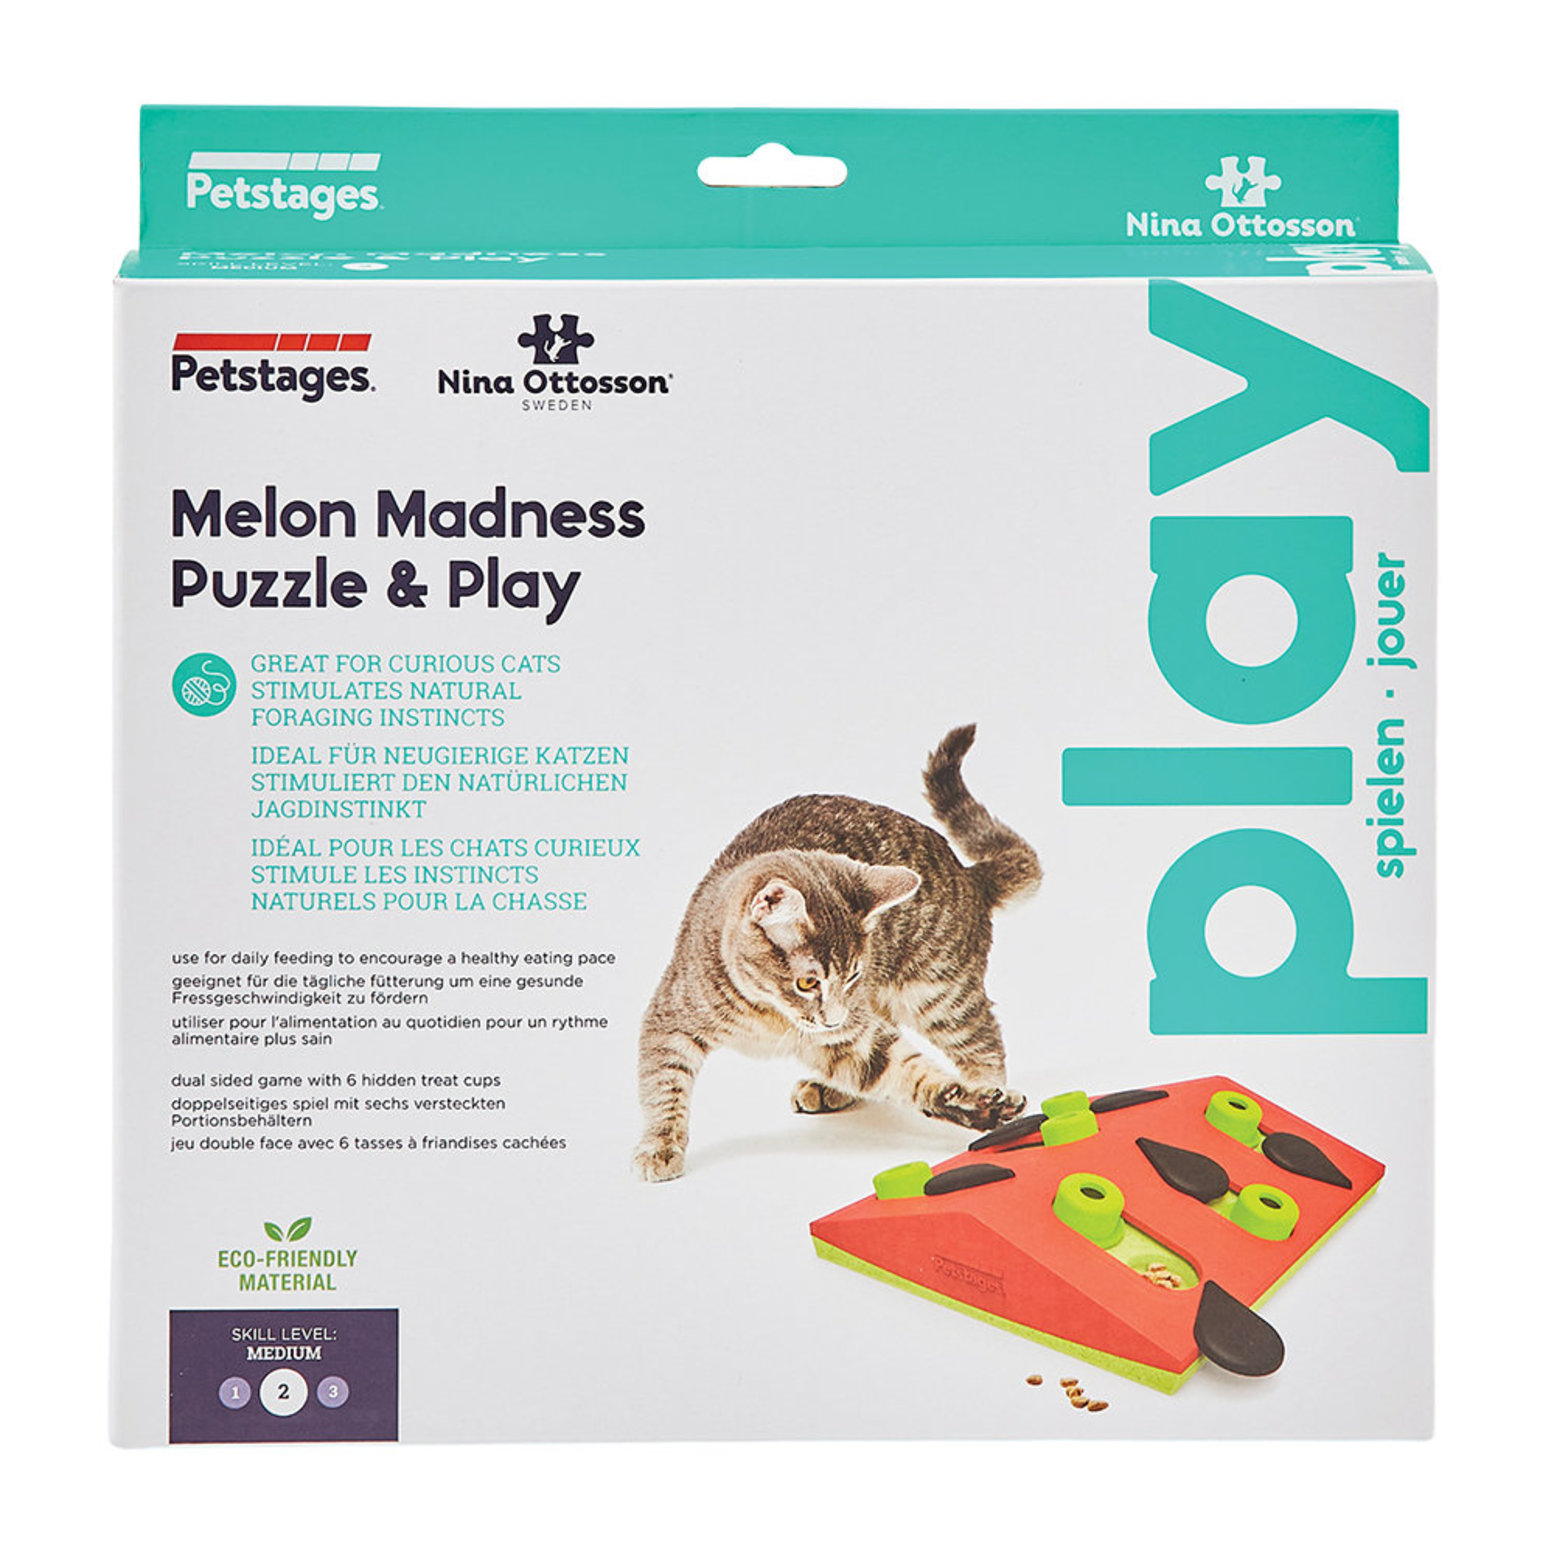 https://cdn.renspets.com/product_images/petstages-puzzle-play-melon-madness-pink/62153268780ebc006ae632dc/pdp_zoom.jpg?c=1645556328